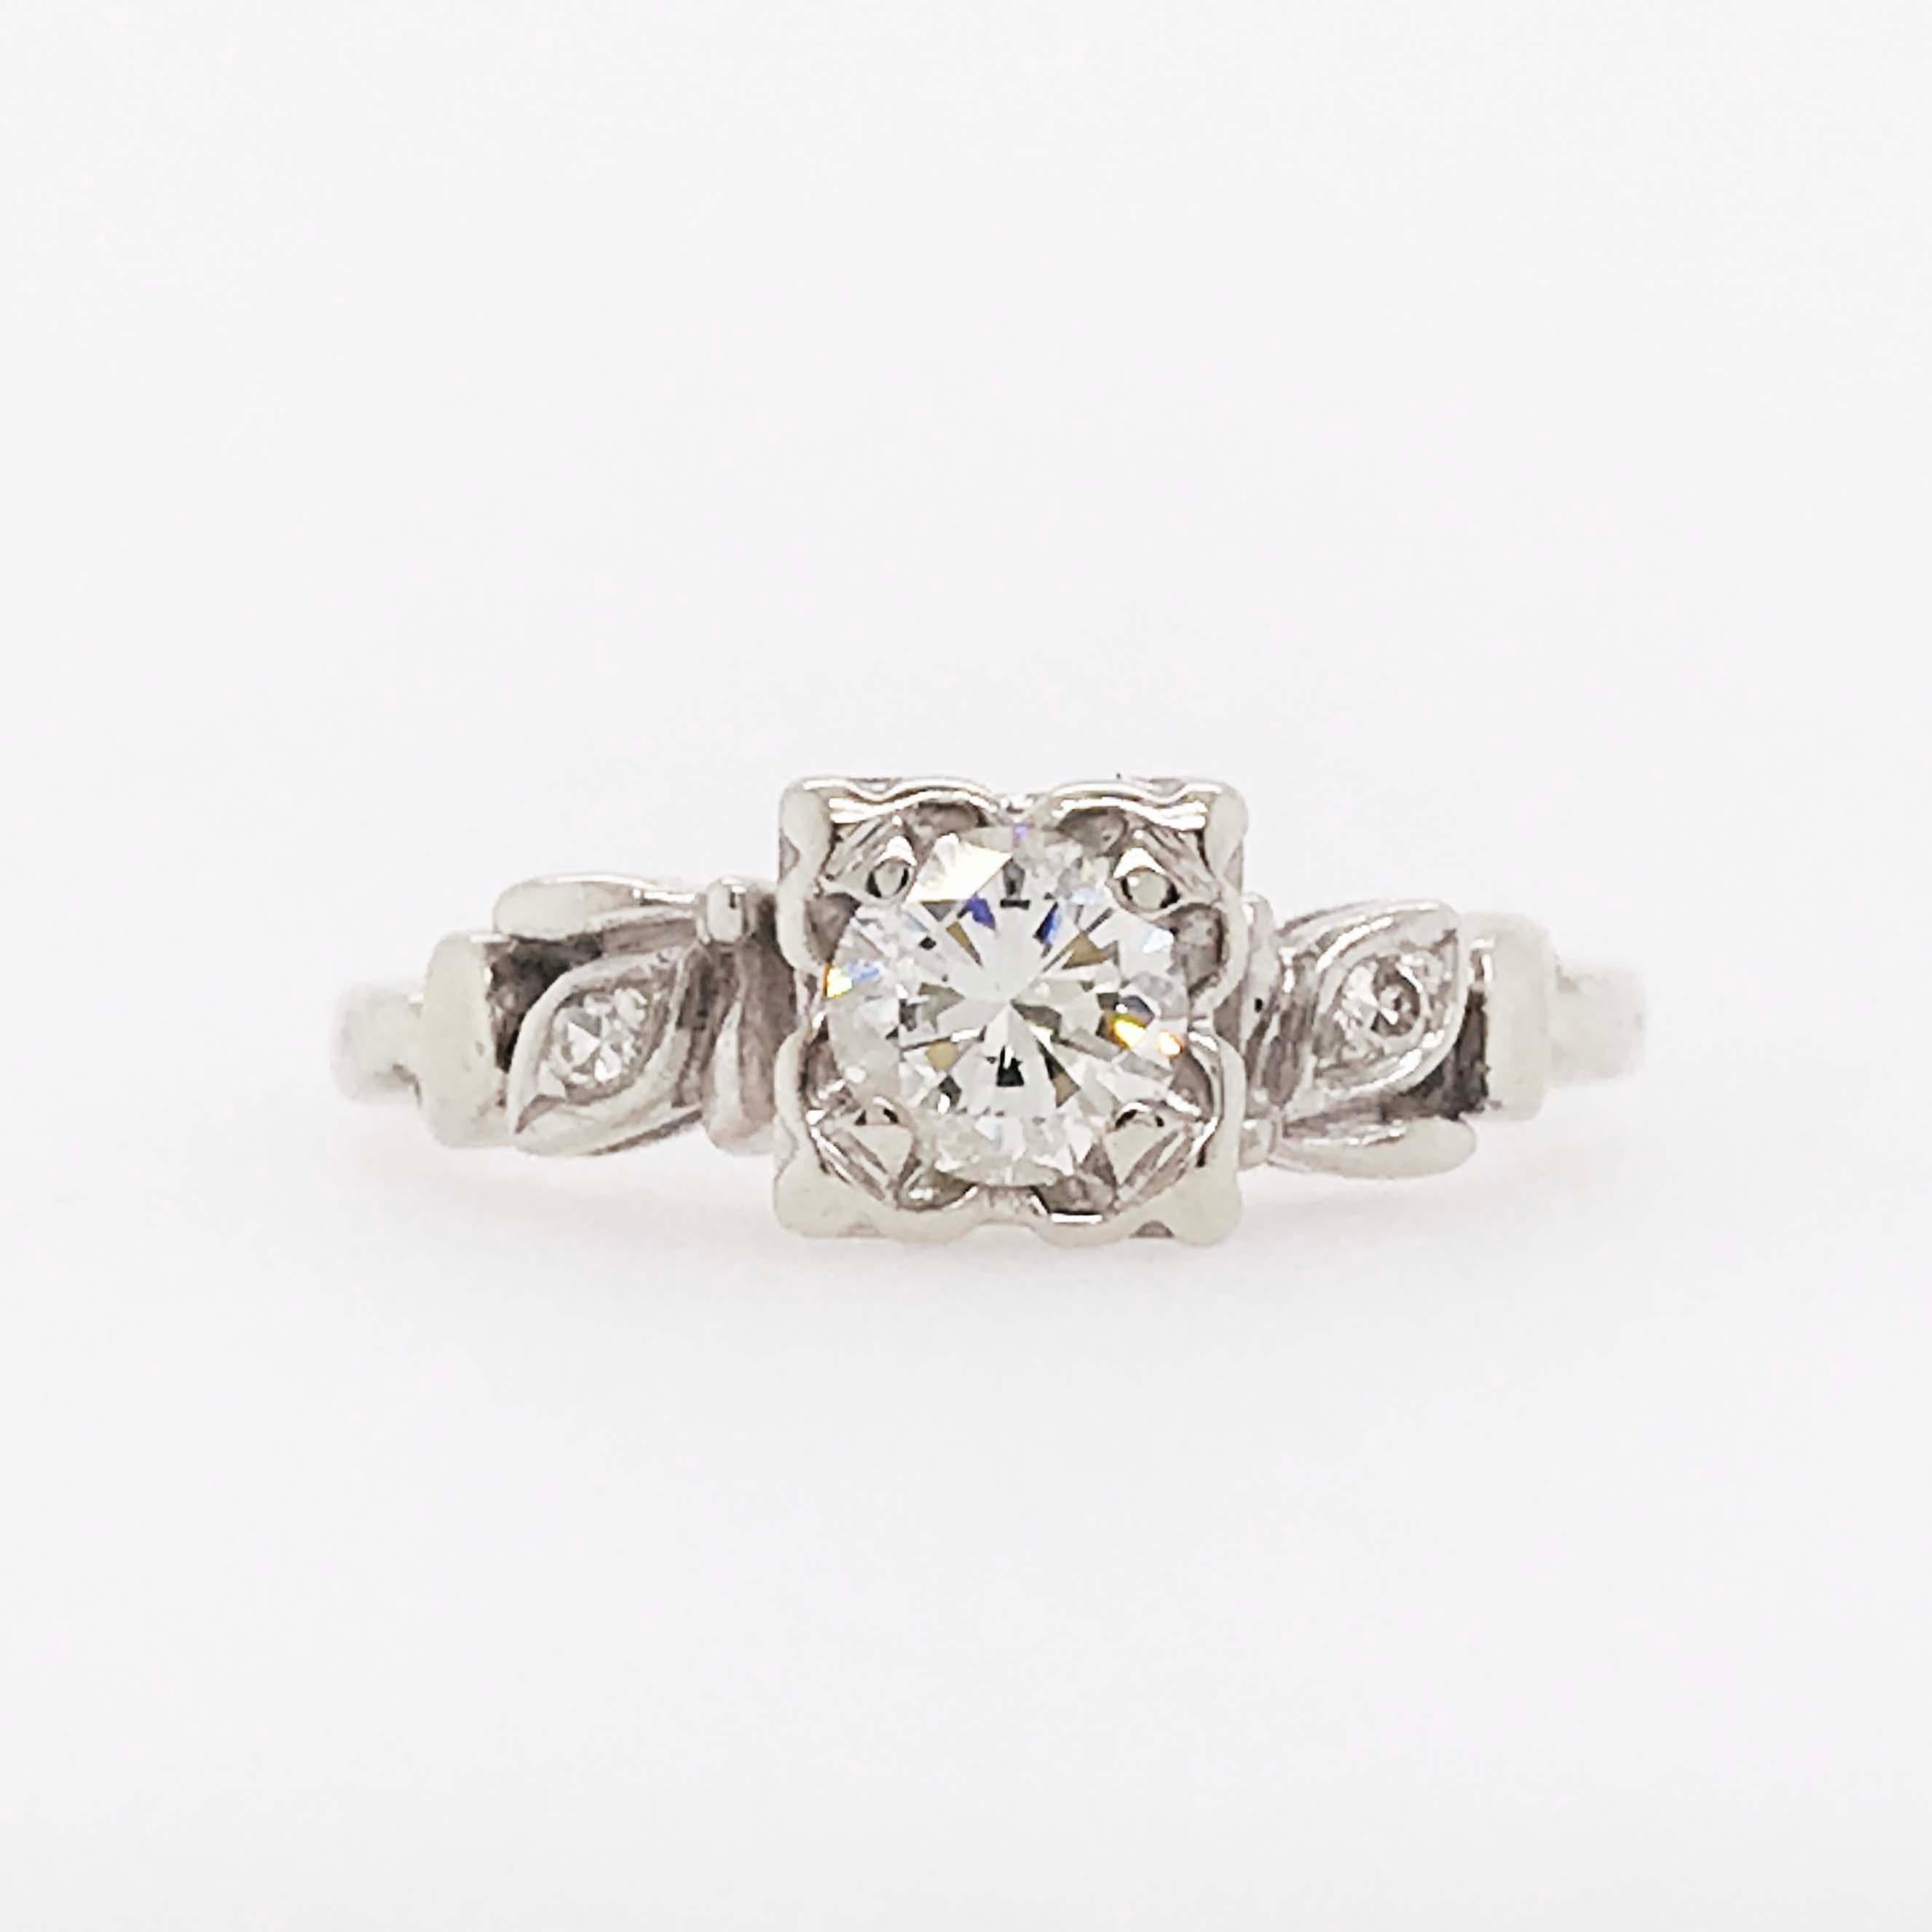 This CIRCA 1953 estate engagement ring is stunning! With an almost half carat diamond set in the center (0.44 ct) in the original setting. This ring has all the original diamonds and metal! It's in fantastic shape and still look as amazing as it did